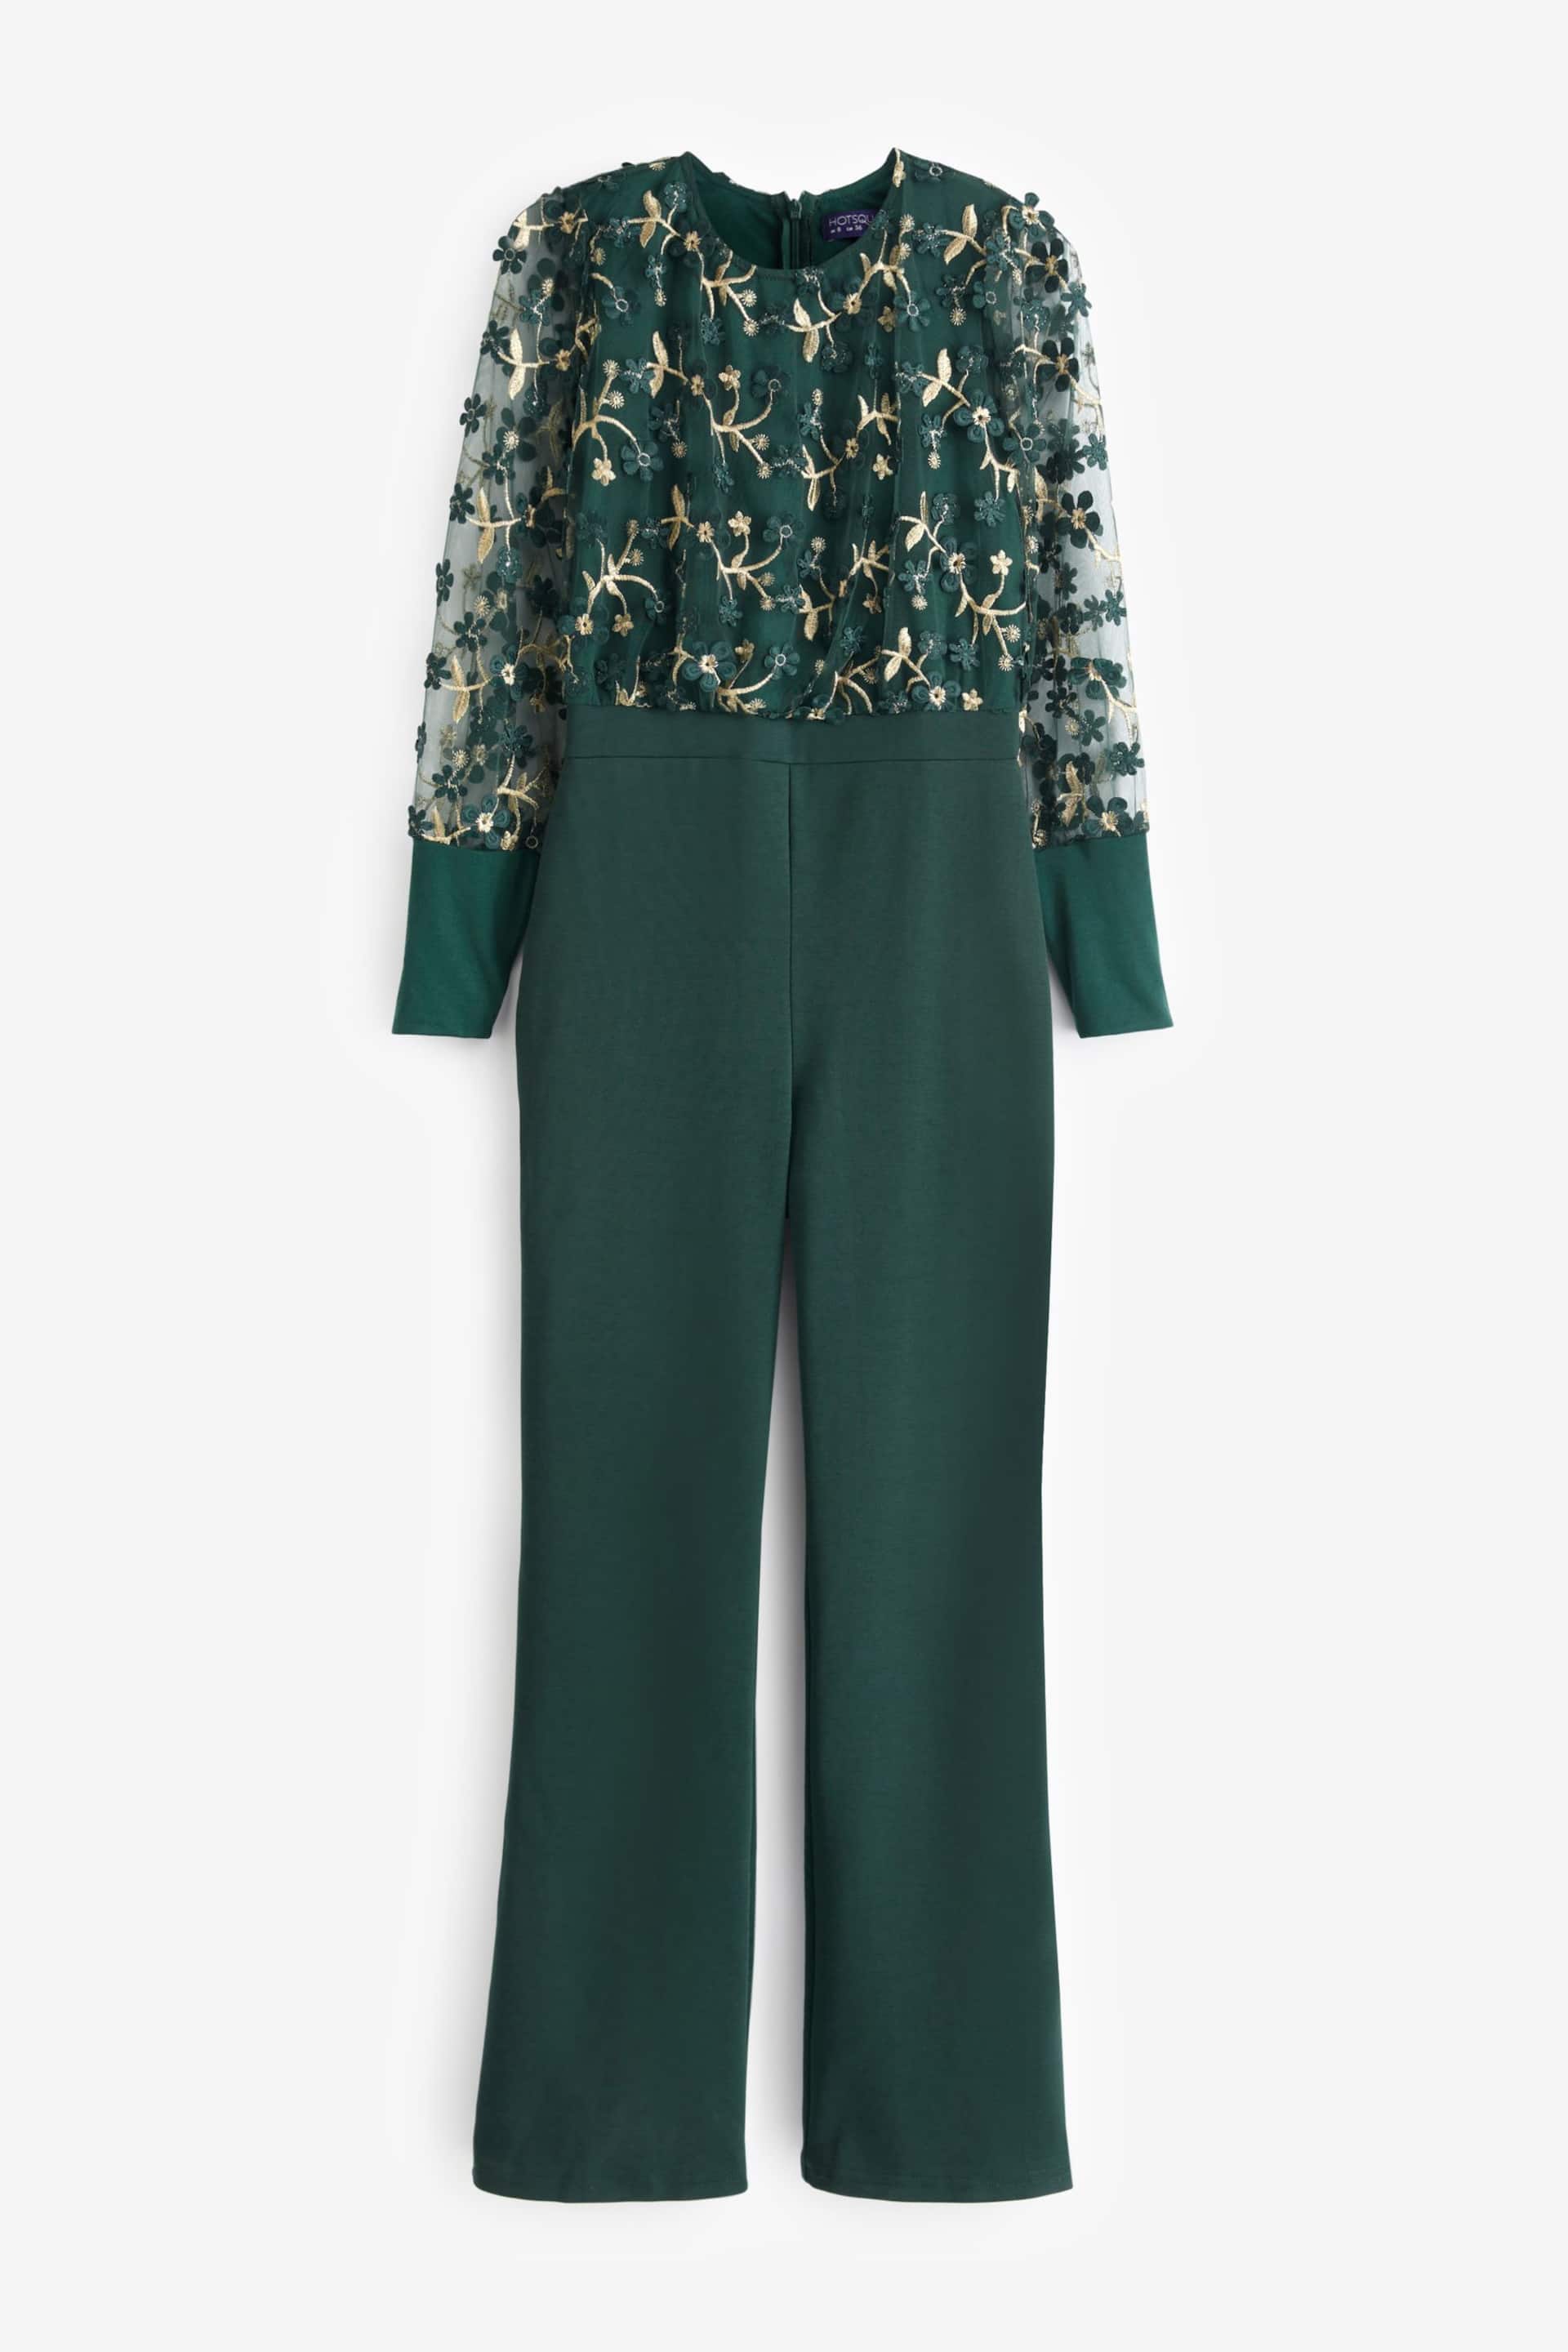 Hot Squash Green Ponte Jumpsuit with Blouson Sleeves - Image 2 of 3